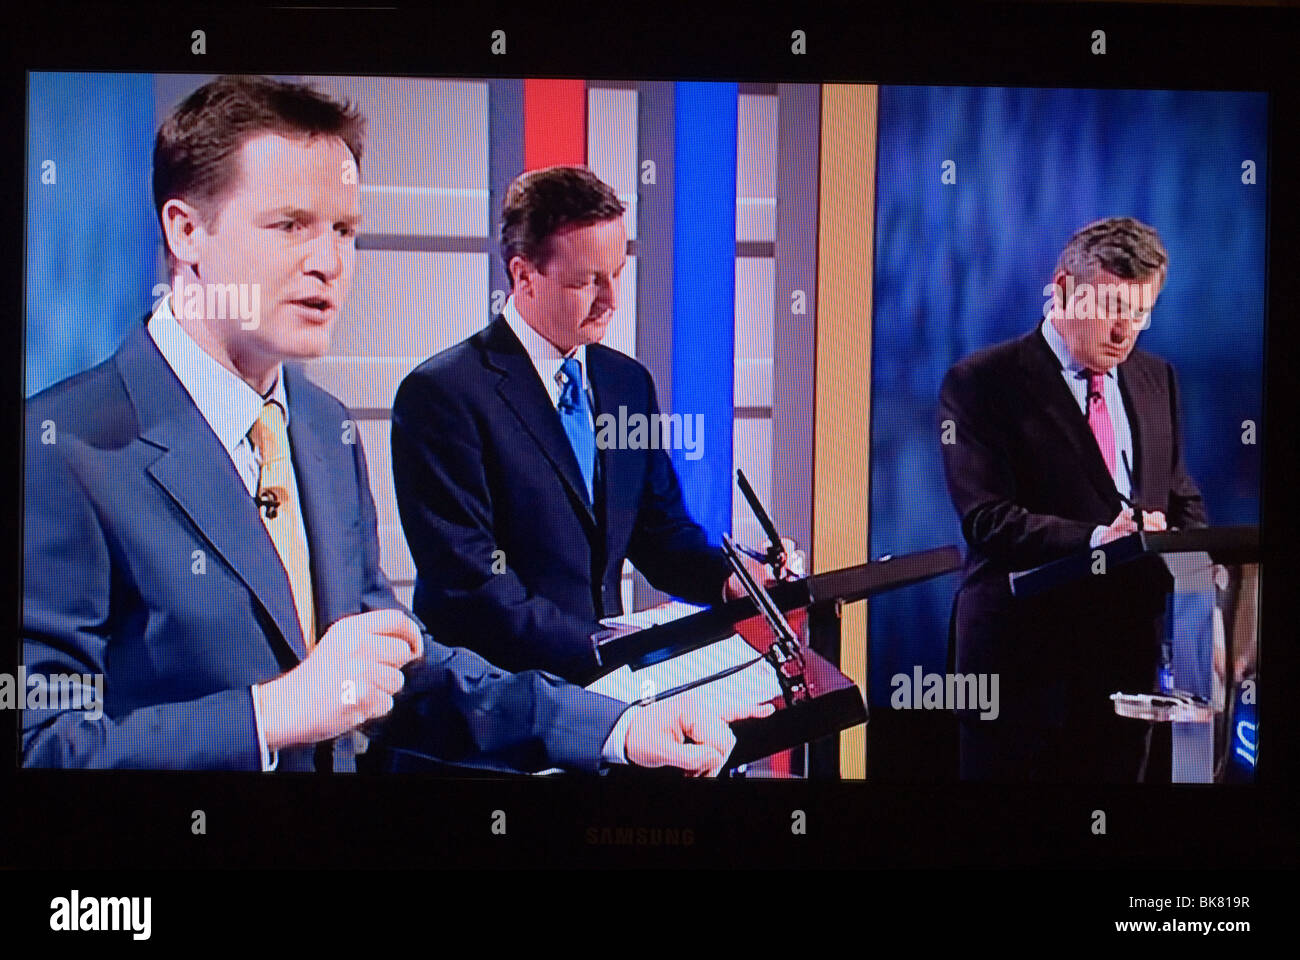 First Television Election Debate UK. MP MPs (L-R) Nick Clegg, David Cameron, Gordon Brown April 15th 2010. 2010s Manchester England HOMER SYKES Stock Photo